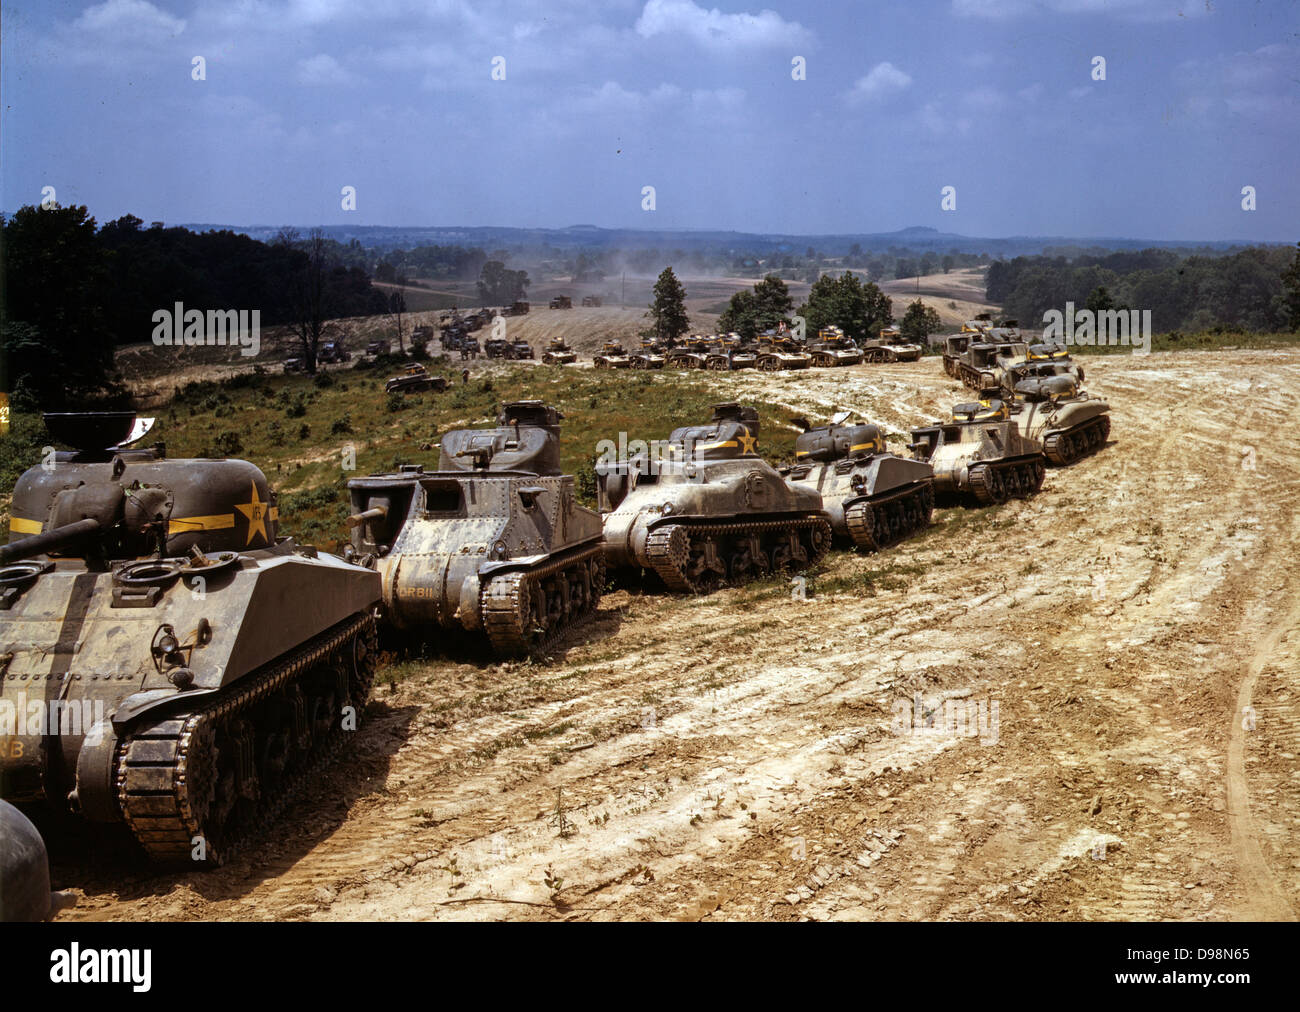 Line of M4 (Sherman) tanks, Fort Knox, Kentucky, USA, June 1942. In excess of 50,000 Medium Tank M4 with gun mounted on revolving turret were produced in Word War II. Armament Vehicle Armoured American Stock Photo